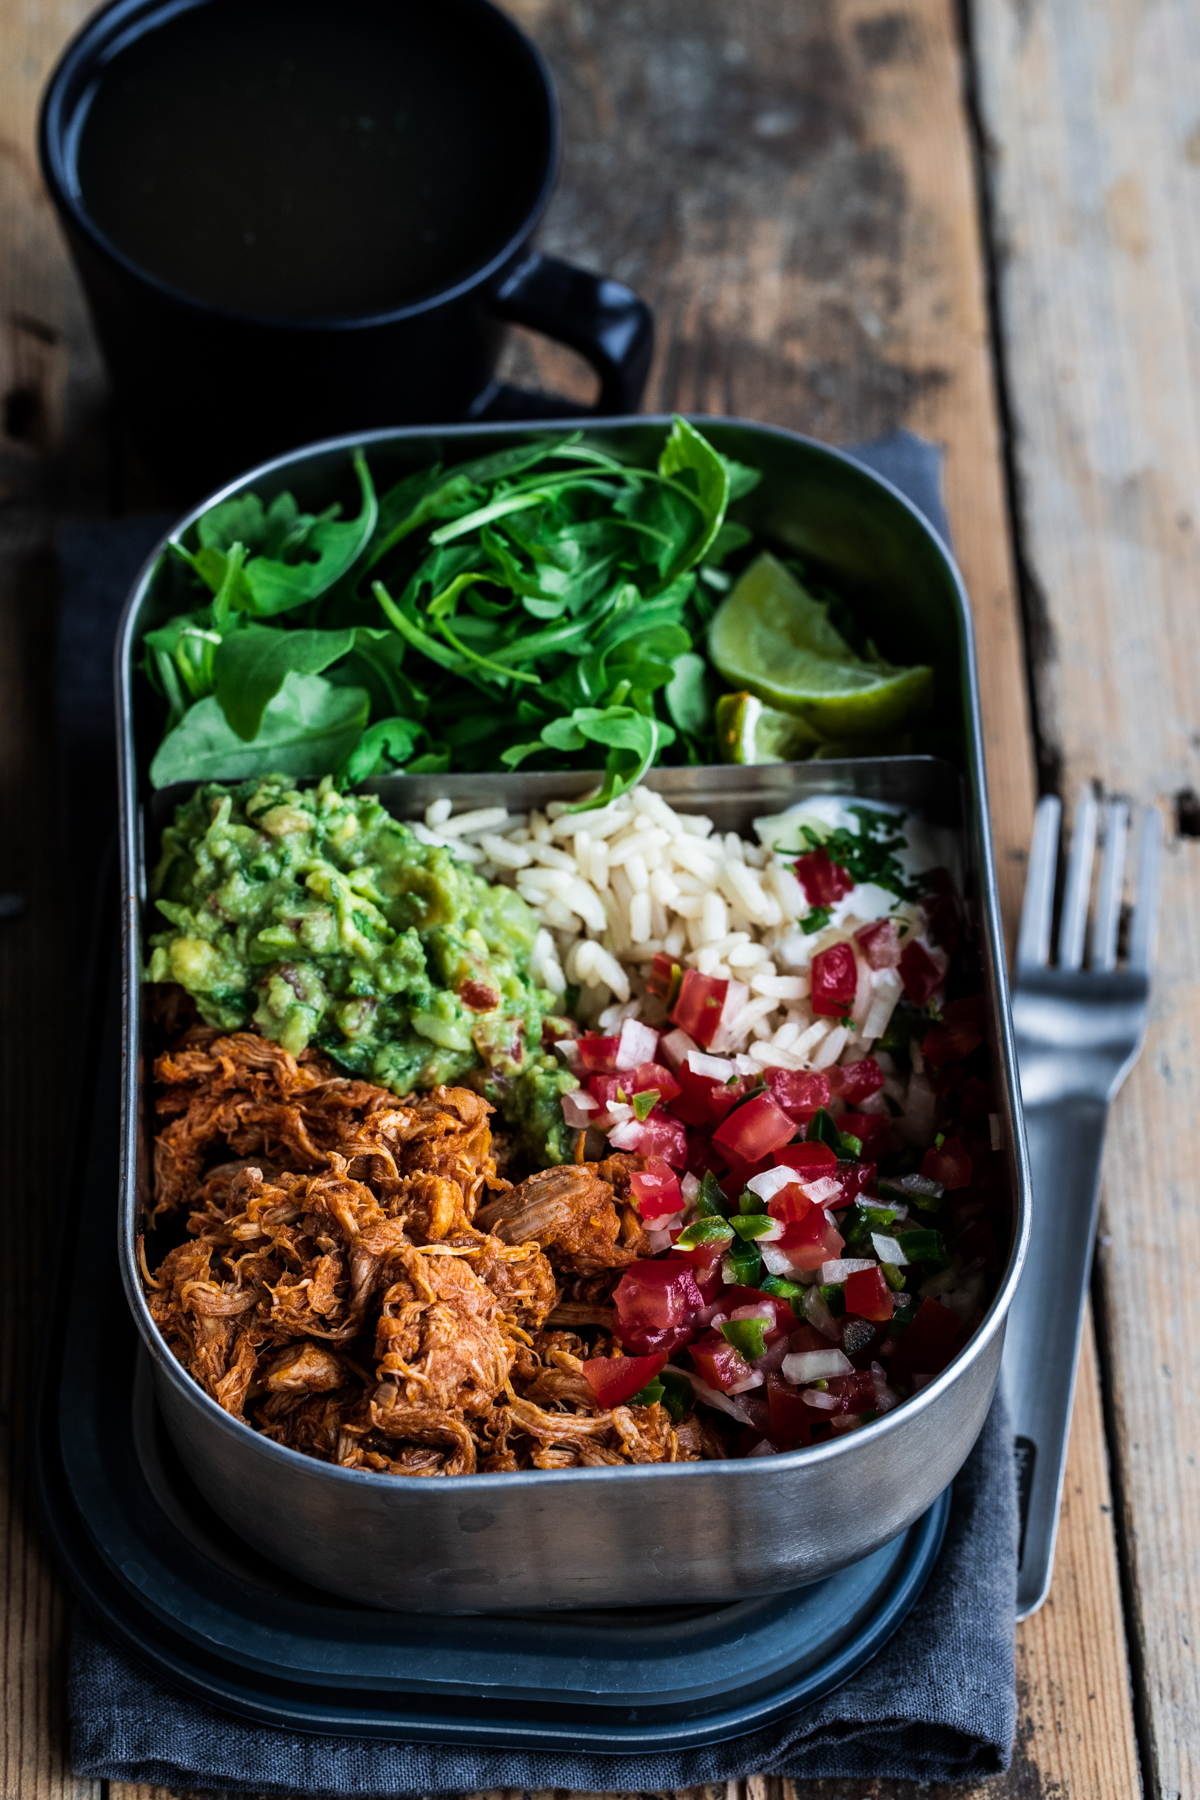 Slow cooked chipotle chicken lunch box with guacamole, rice, pico de gallo and greens on a wooden background.